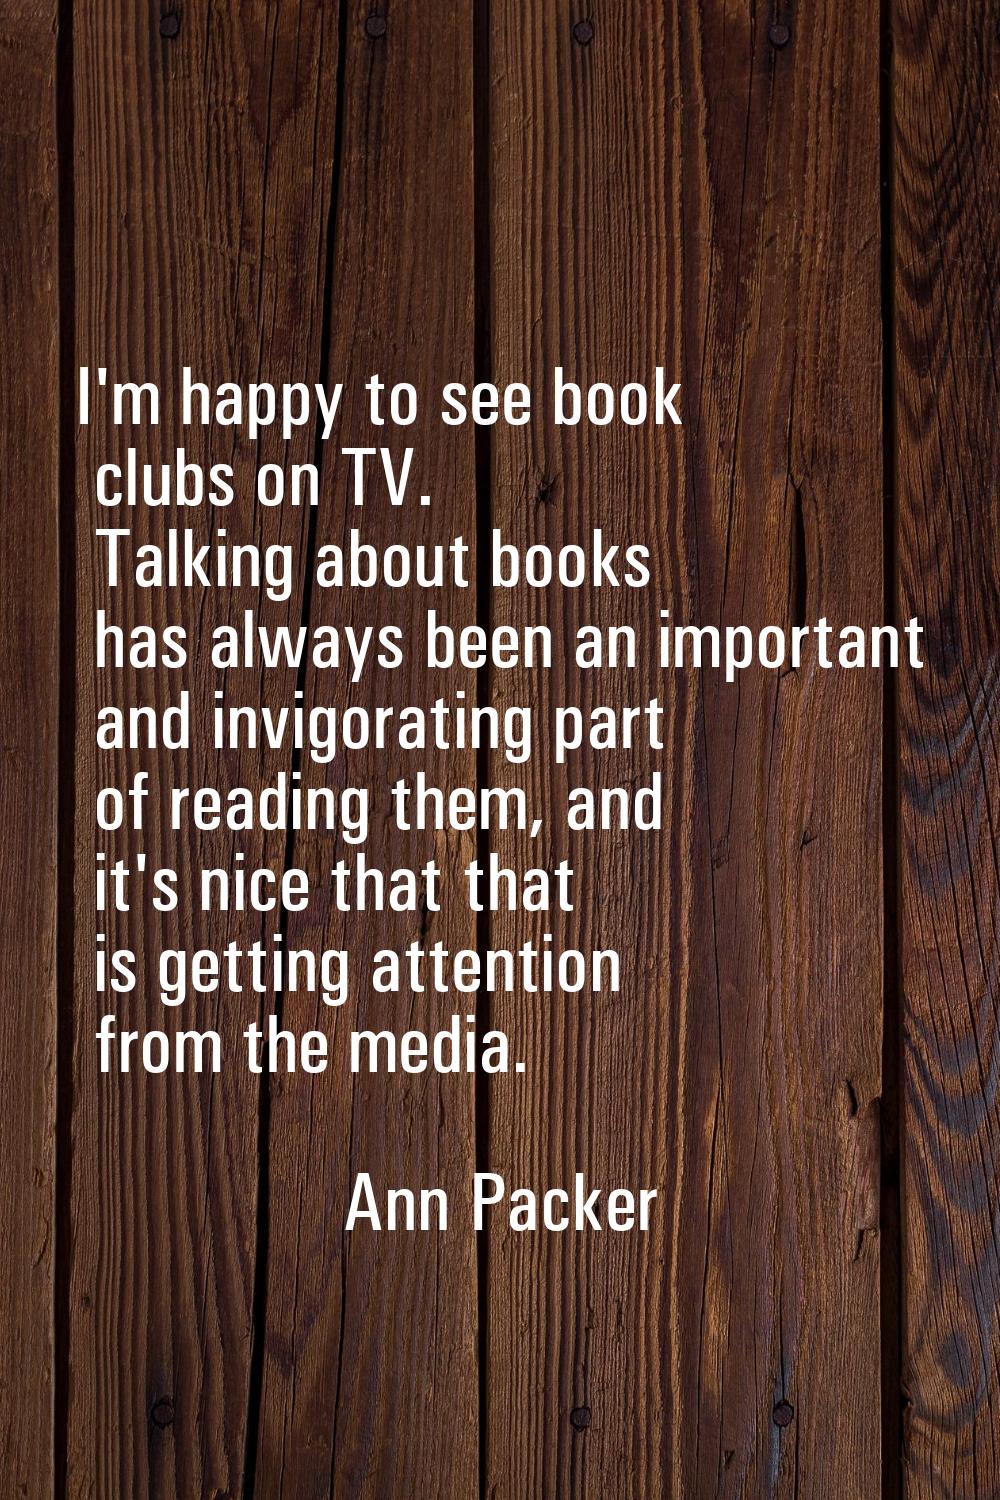 I'm happy to see book clubs on TV. Talking about books has always been an important and invigoratin